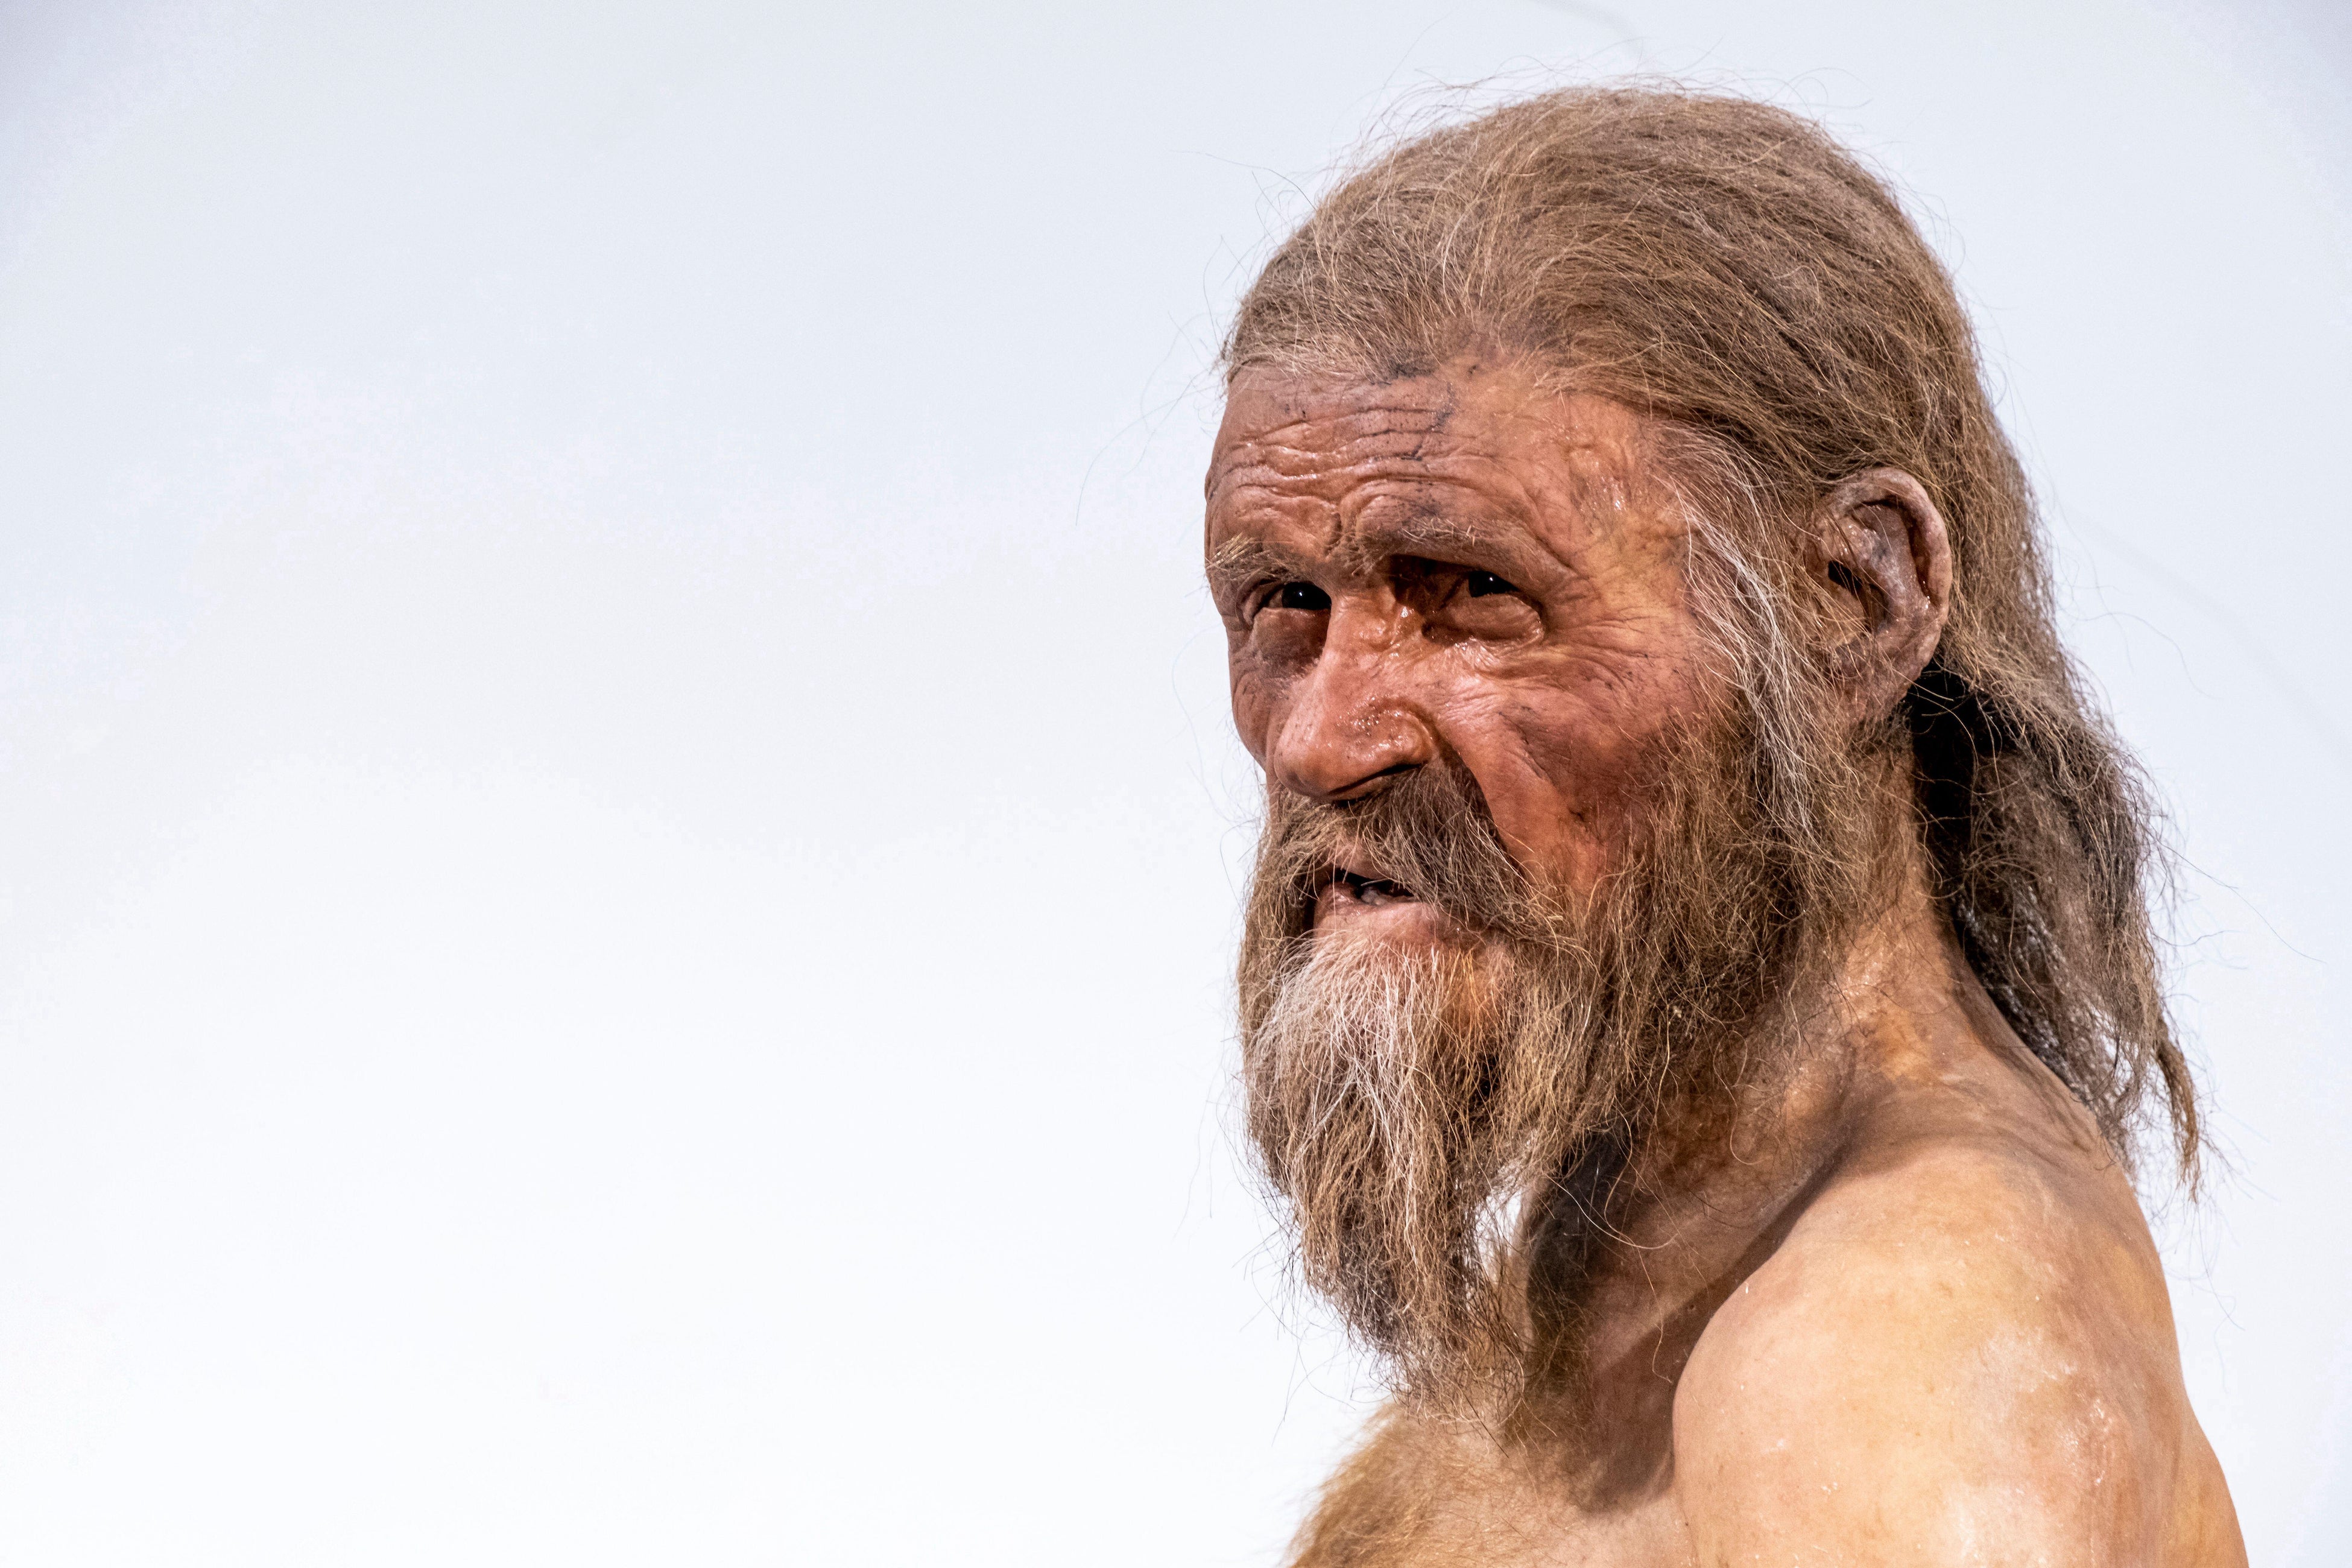 Ötzi the Iceman Gets a New Looks from Genetic Analysis